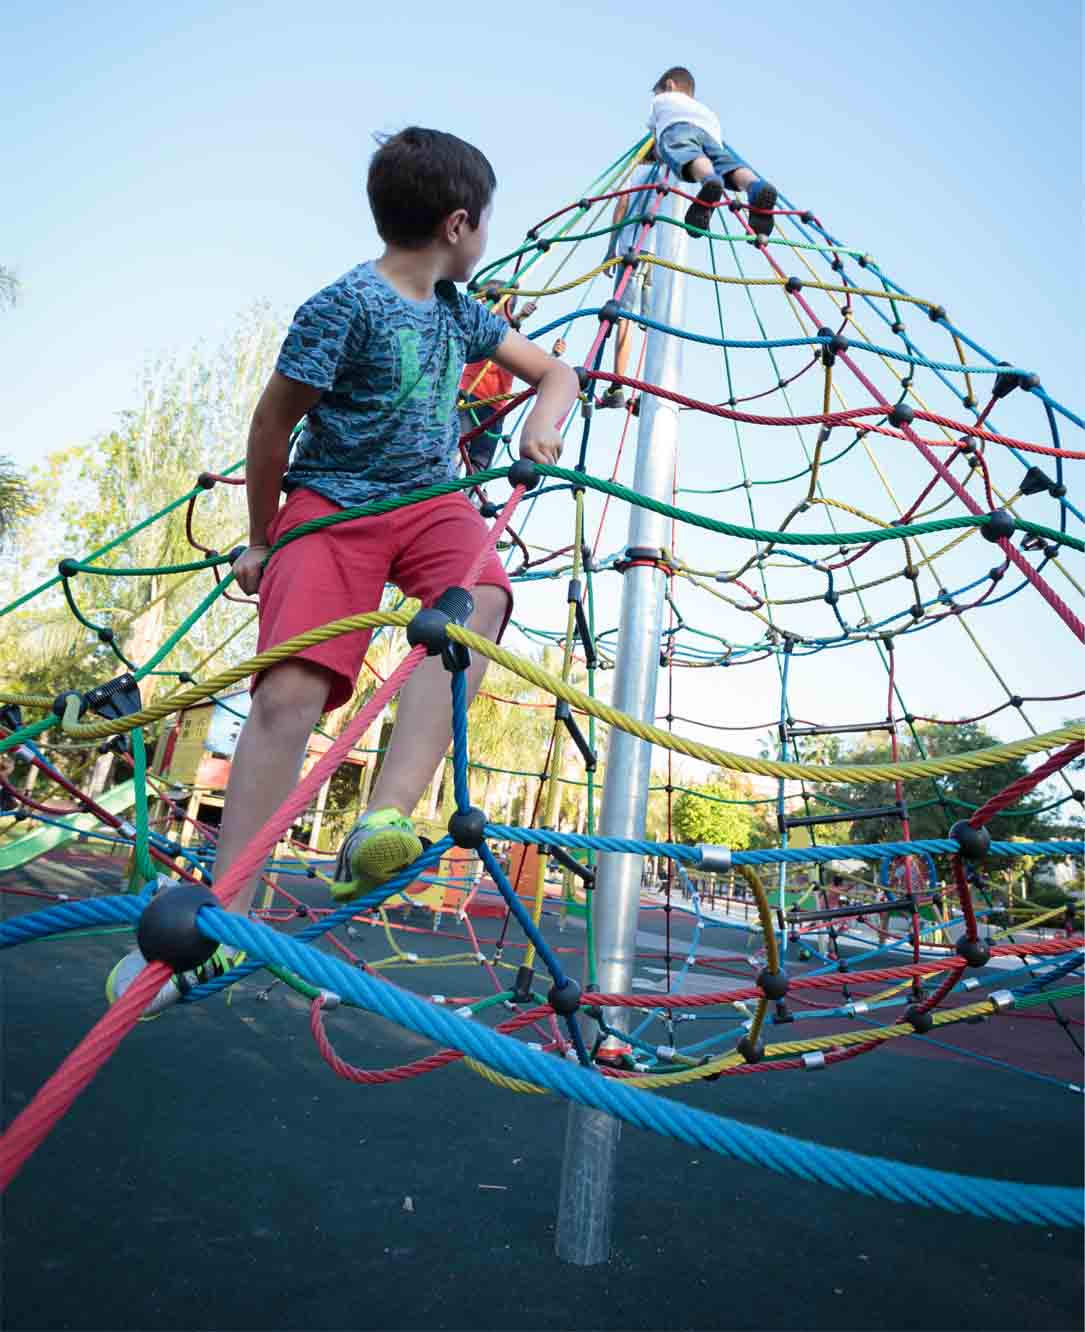 boys playing in a climbing pyramid in children's playgrounds